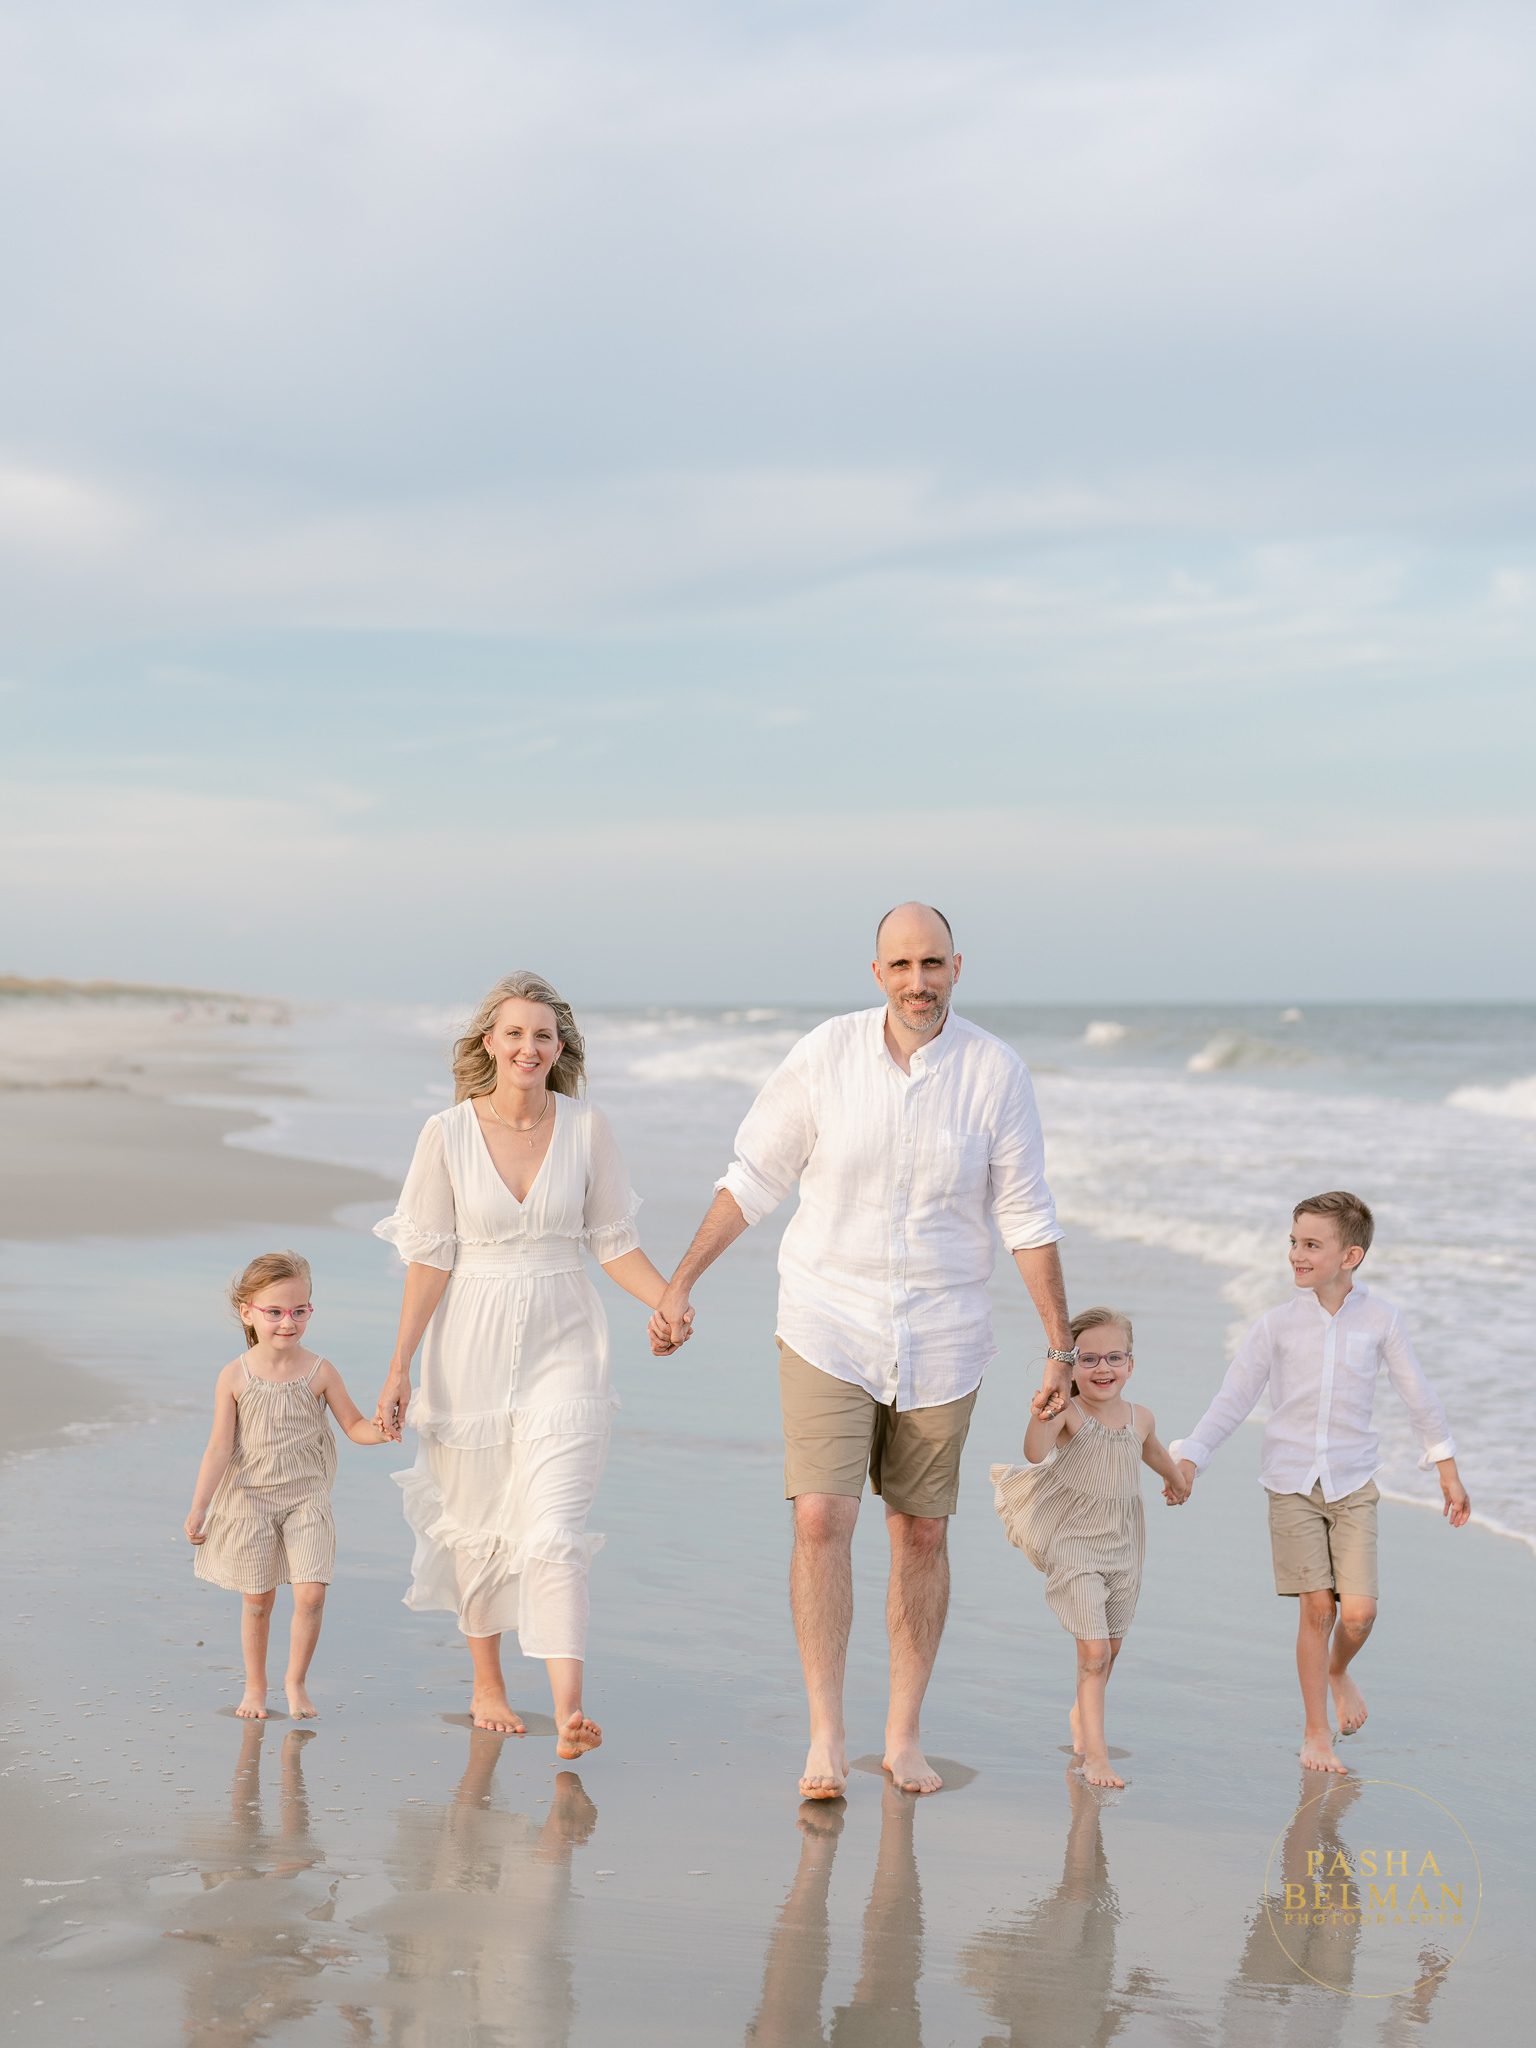 Murrells Inlet Beach Family Photography - Family Beach Portraits in Myrtle Beach and Murrells Inlet